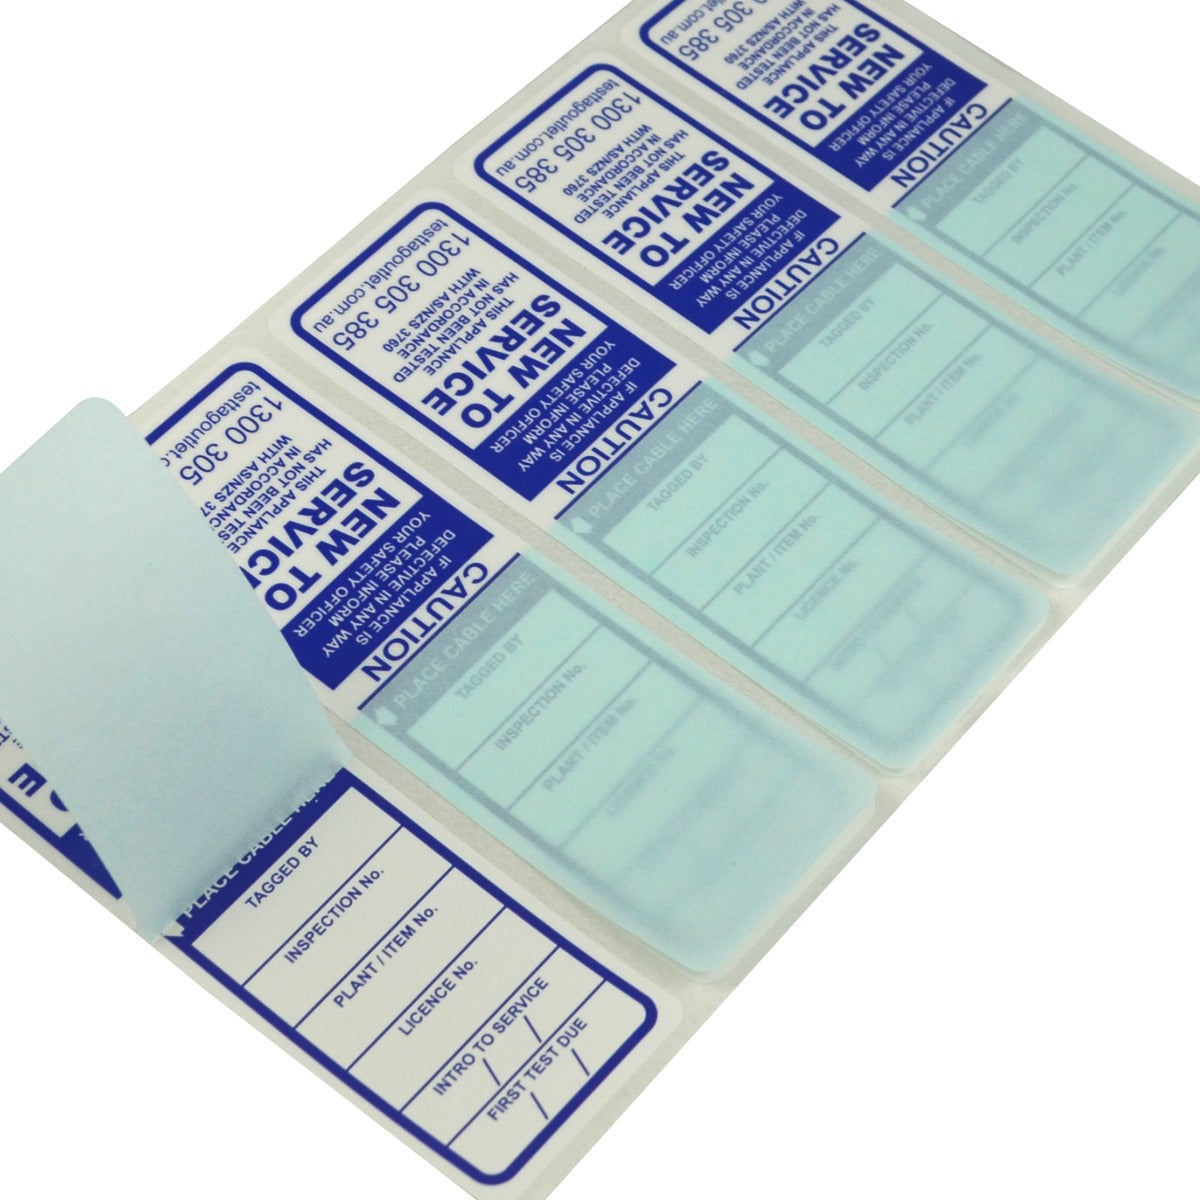 100% Australian Made, Waterproof New to Service Tags that complies with AS/NZS 3760 standards 